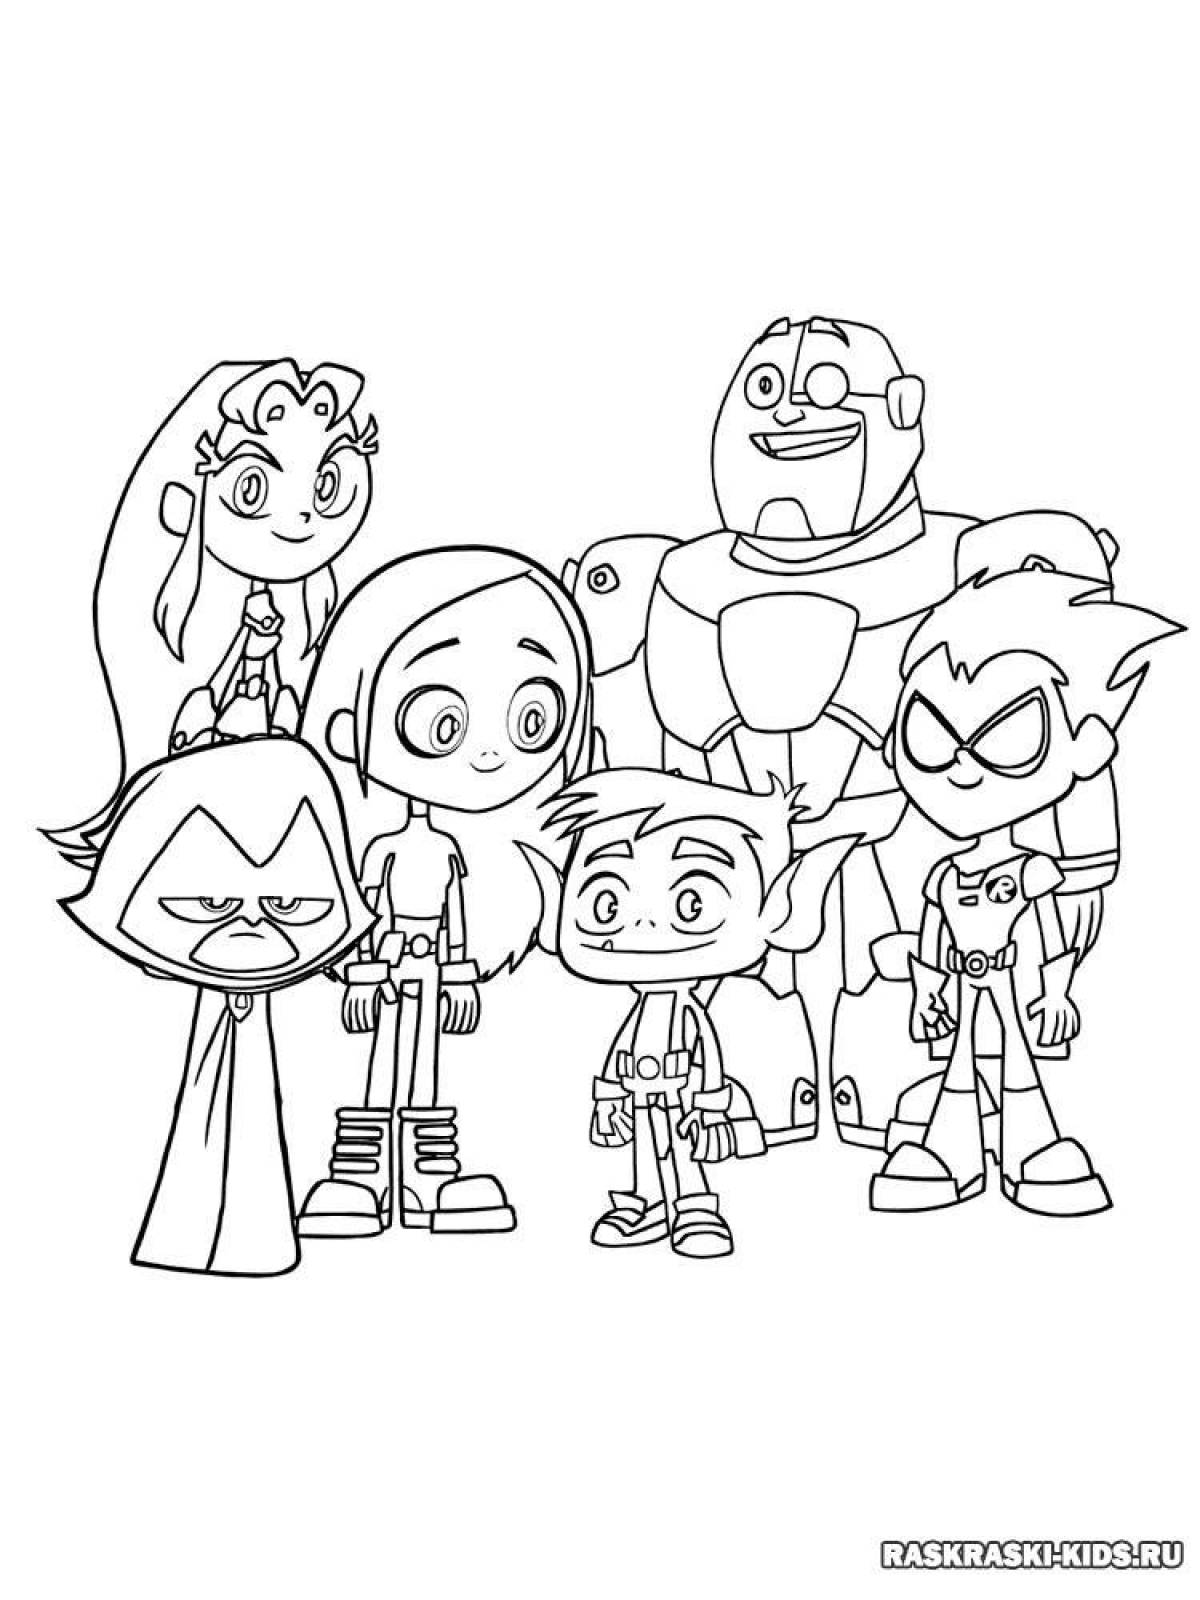 Quirky coloring book from the 2014 animated series